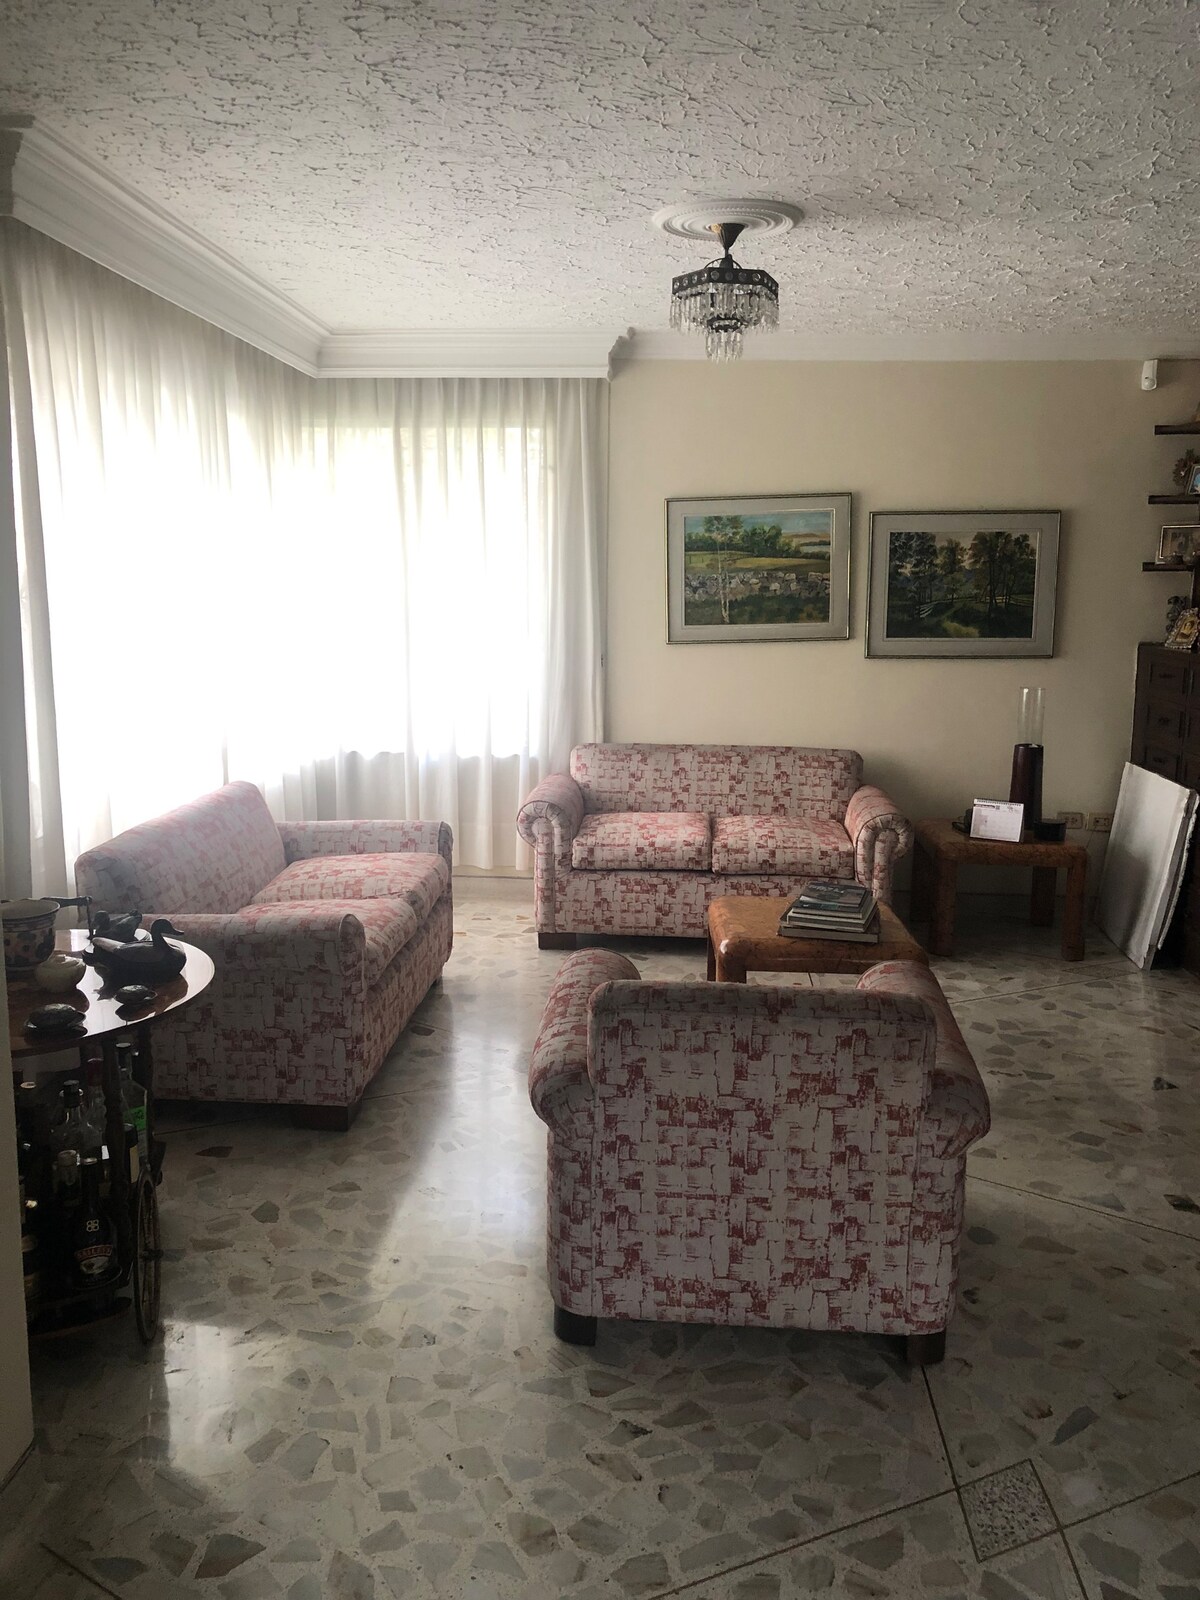 House for rent for COP16 Cali, Colombia